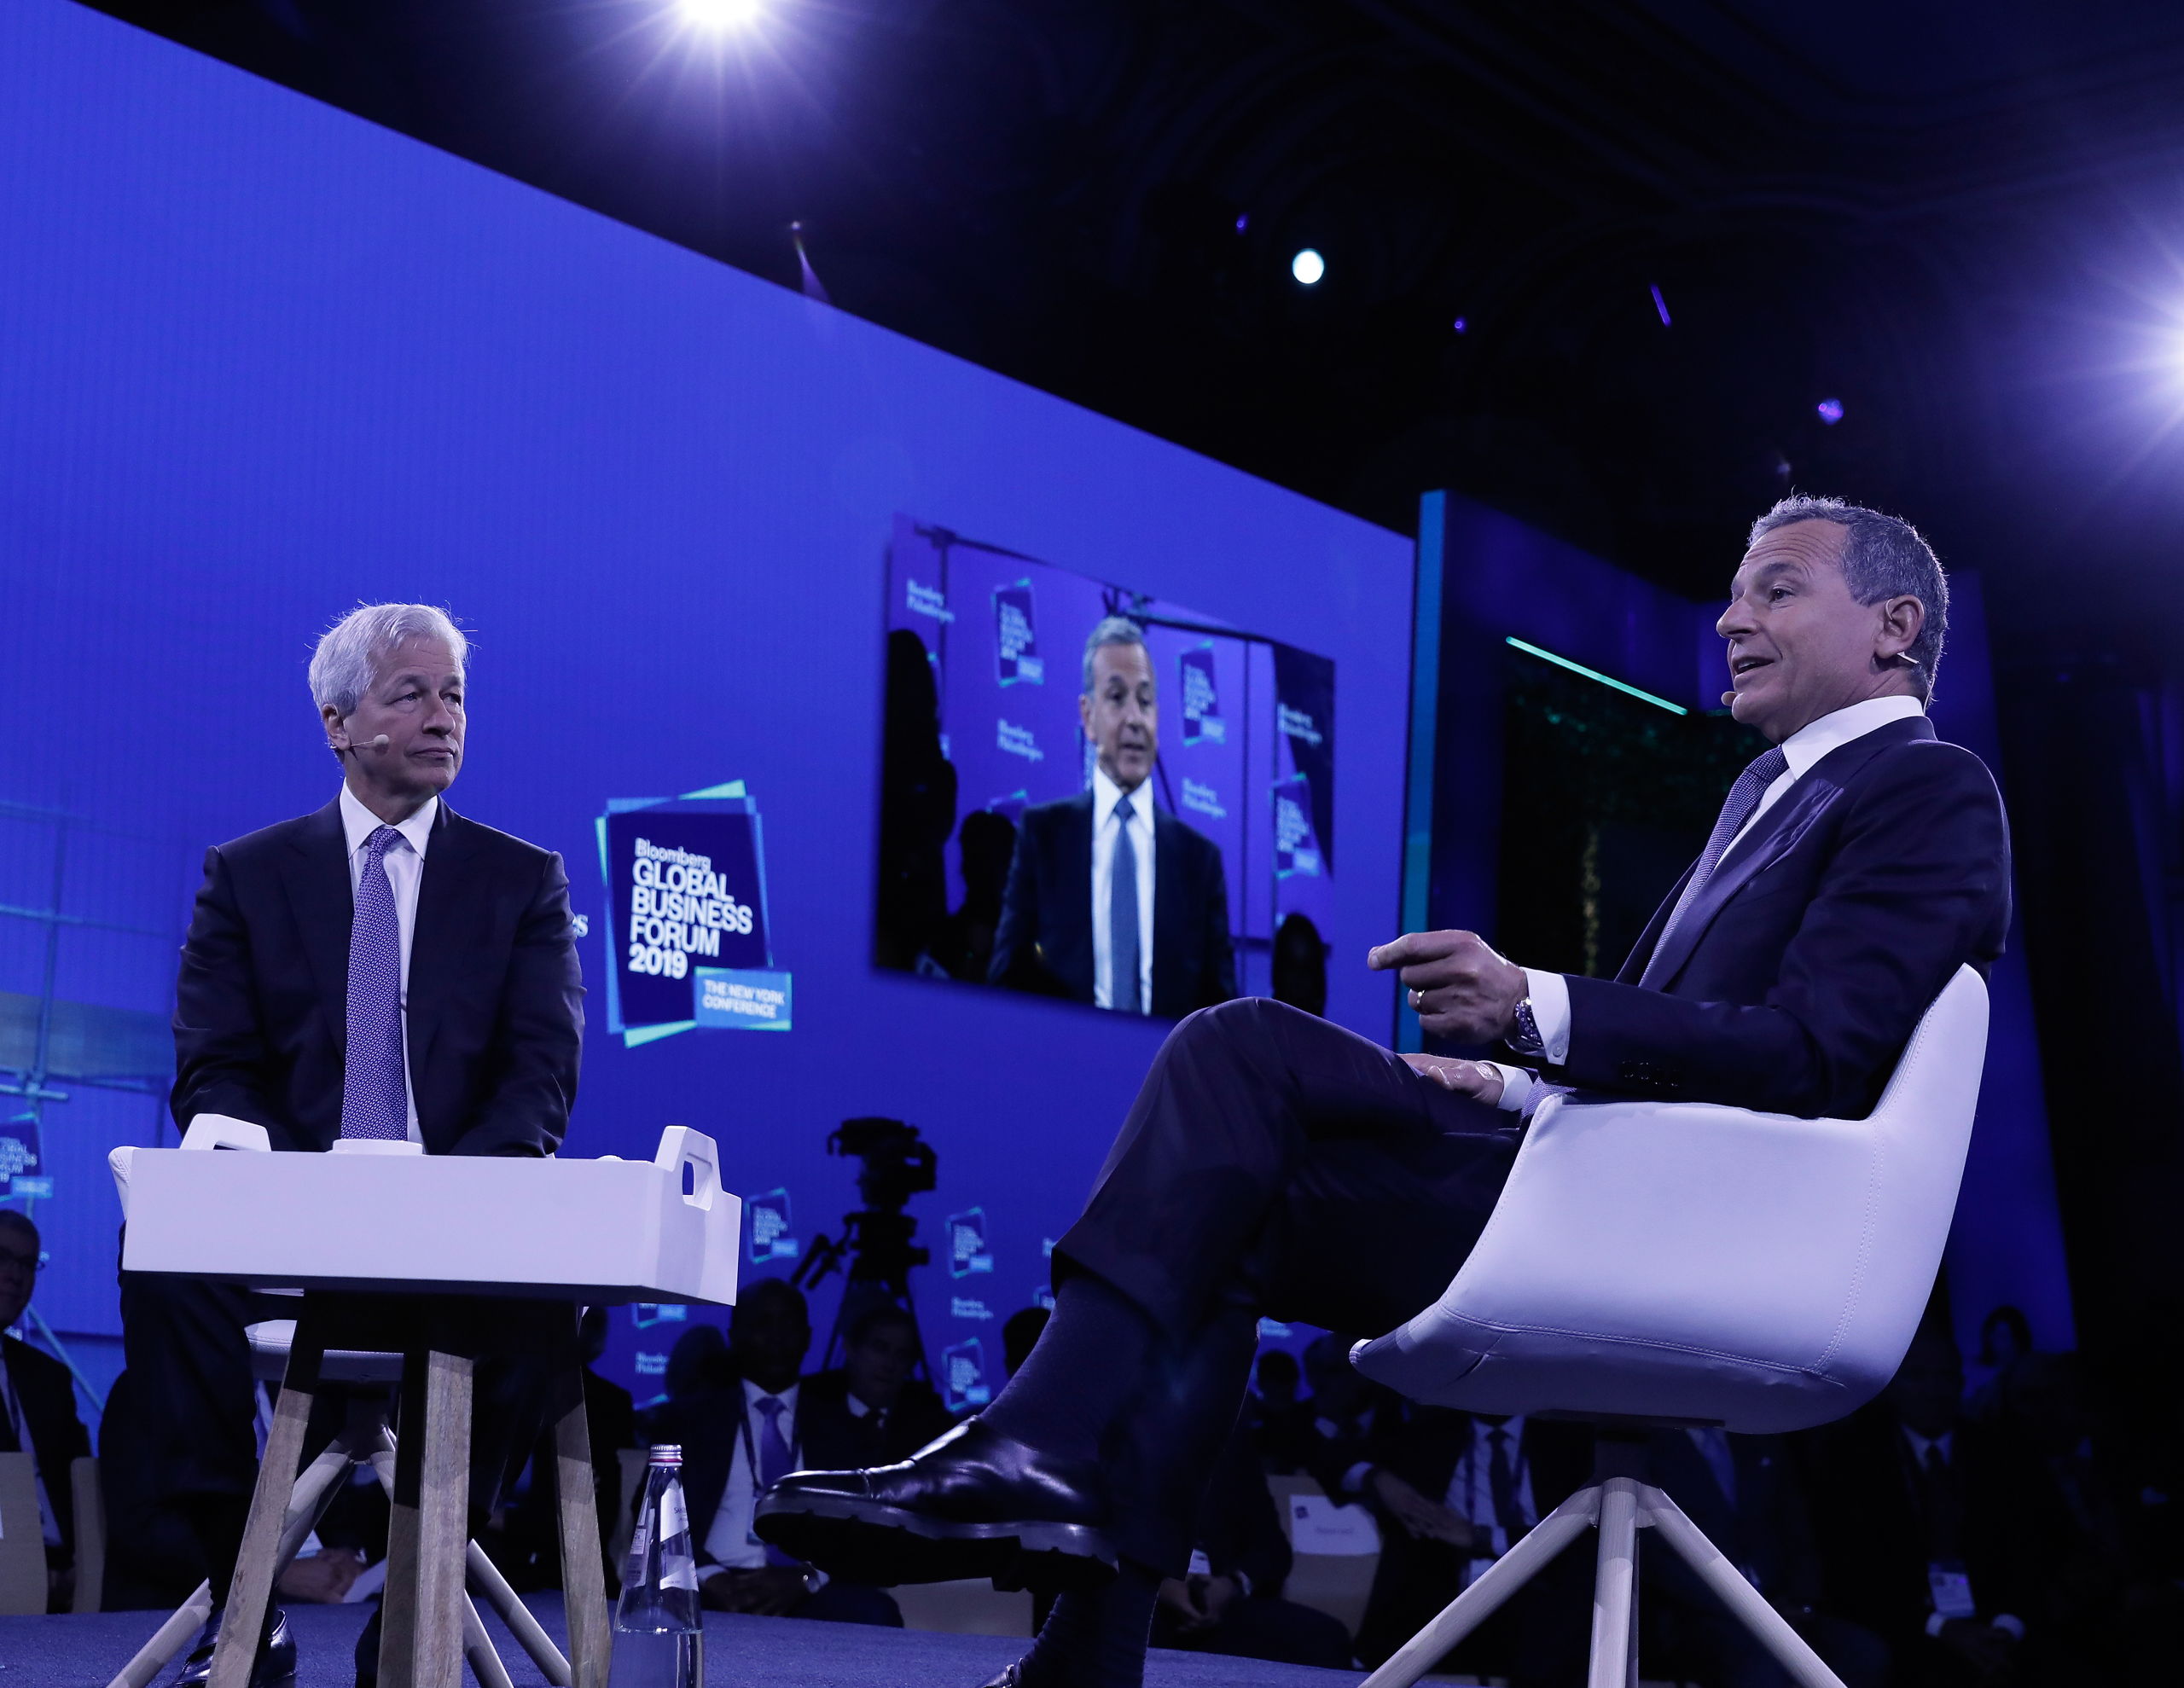 2019-09-25 20:43:05 epa07869534 Robert Iger, chairman and chief executive officer of The Walt Disney Company (R) and Jamie Dimon, Chairman and CEO of JPMorgan Chase speak at the Bloomberg Global Business Forum 2019 at the Plaza Hotel in New York, New York, USA, 25 September 2019. World leaders gathered for the United Nations General Debate this week, and business leaders are gathering for the event, which was organized by Bloomberg Philanthropies, to discuss economic and trade issues, globalization, innovation, and competition.  EPA/PETER FOLEY